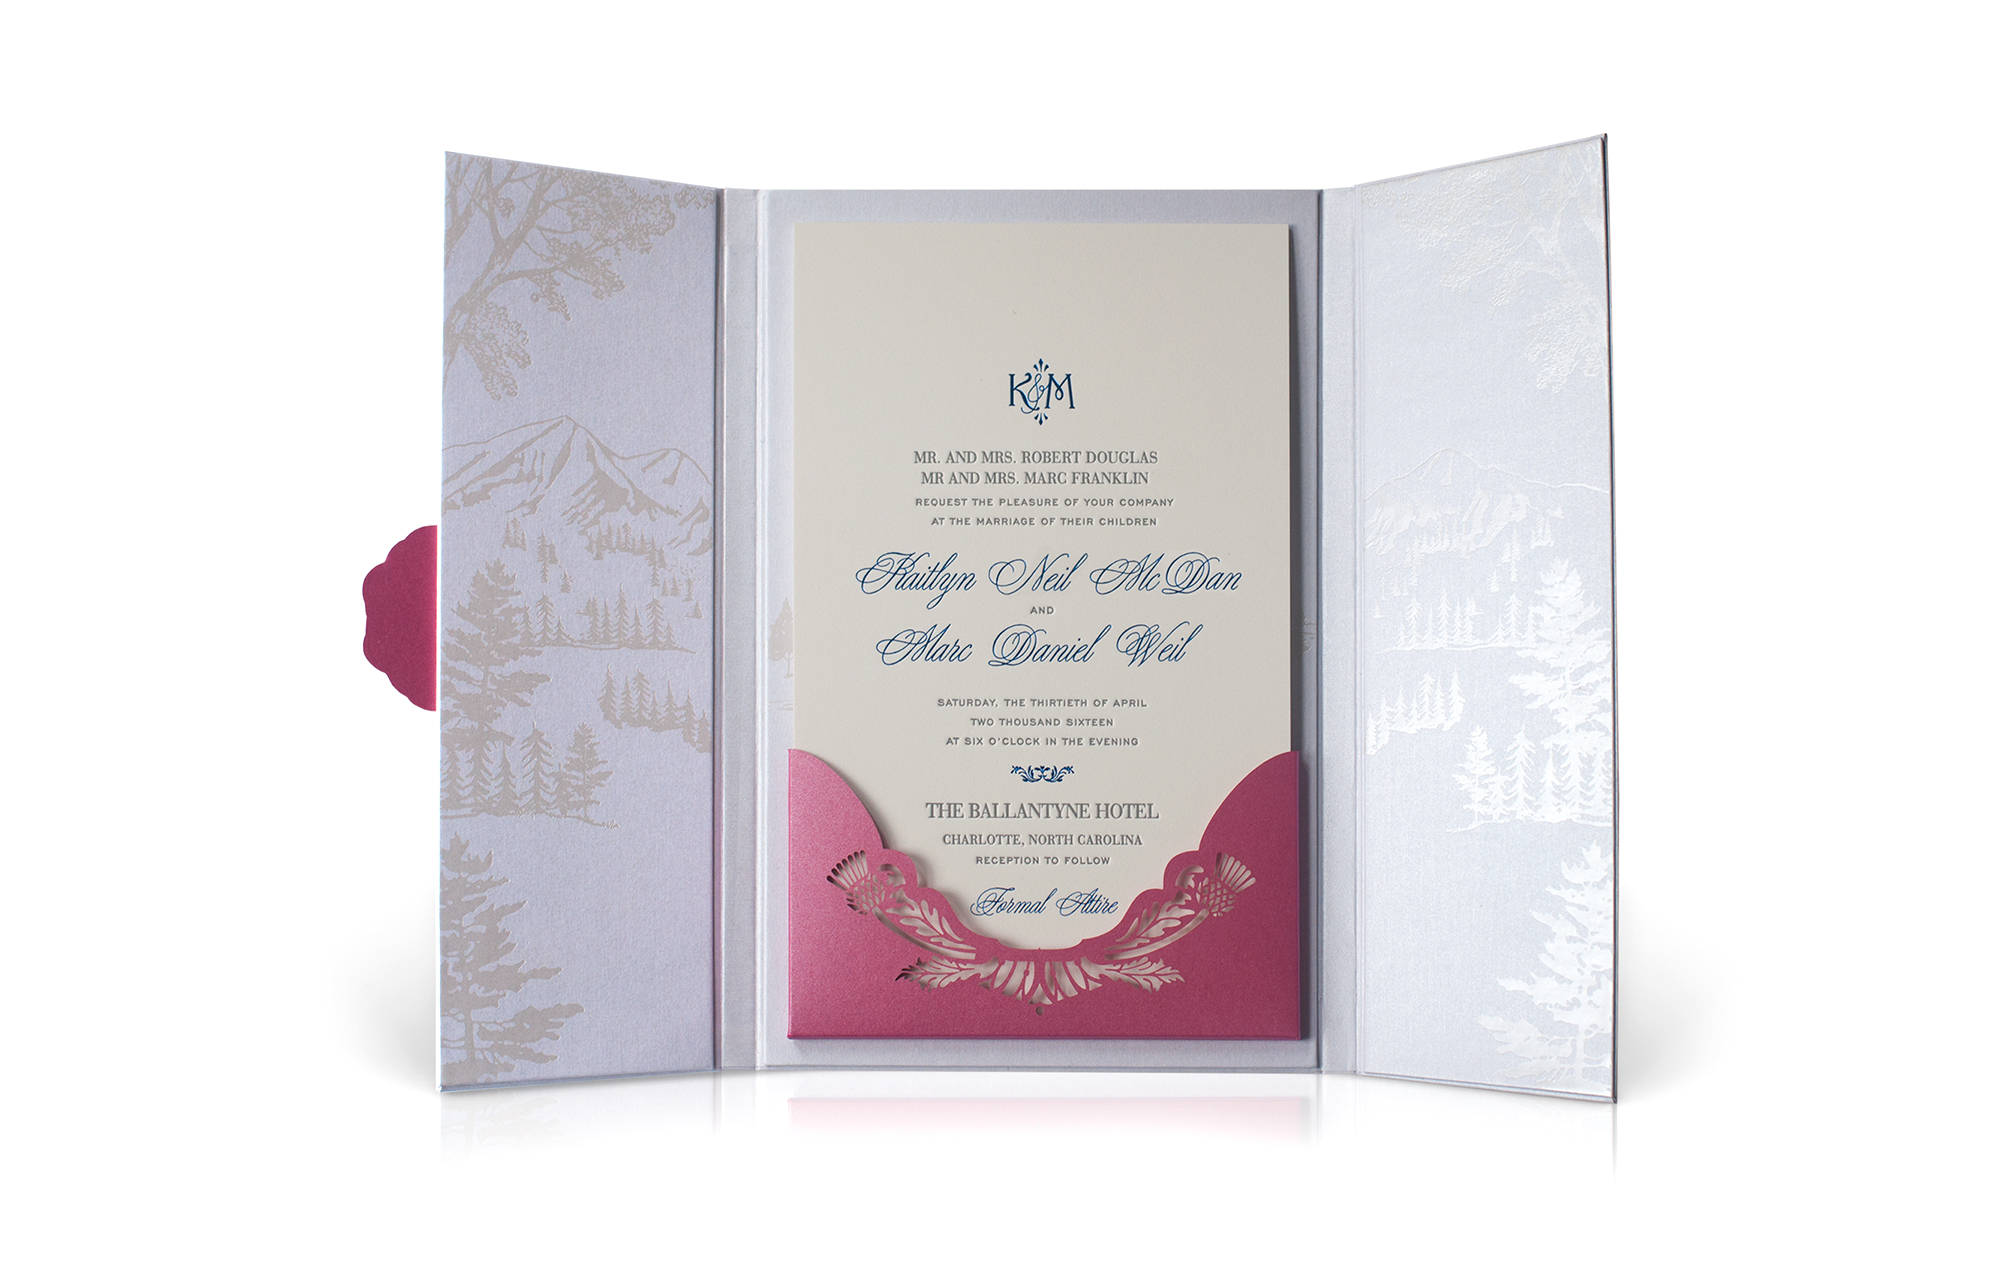 Blue and pearl foil on an invitation folder with a laser cut pocket